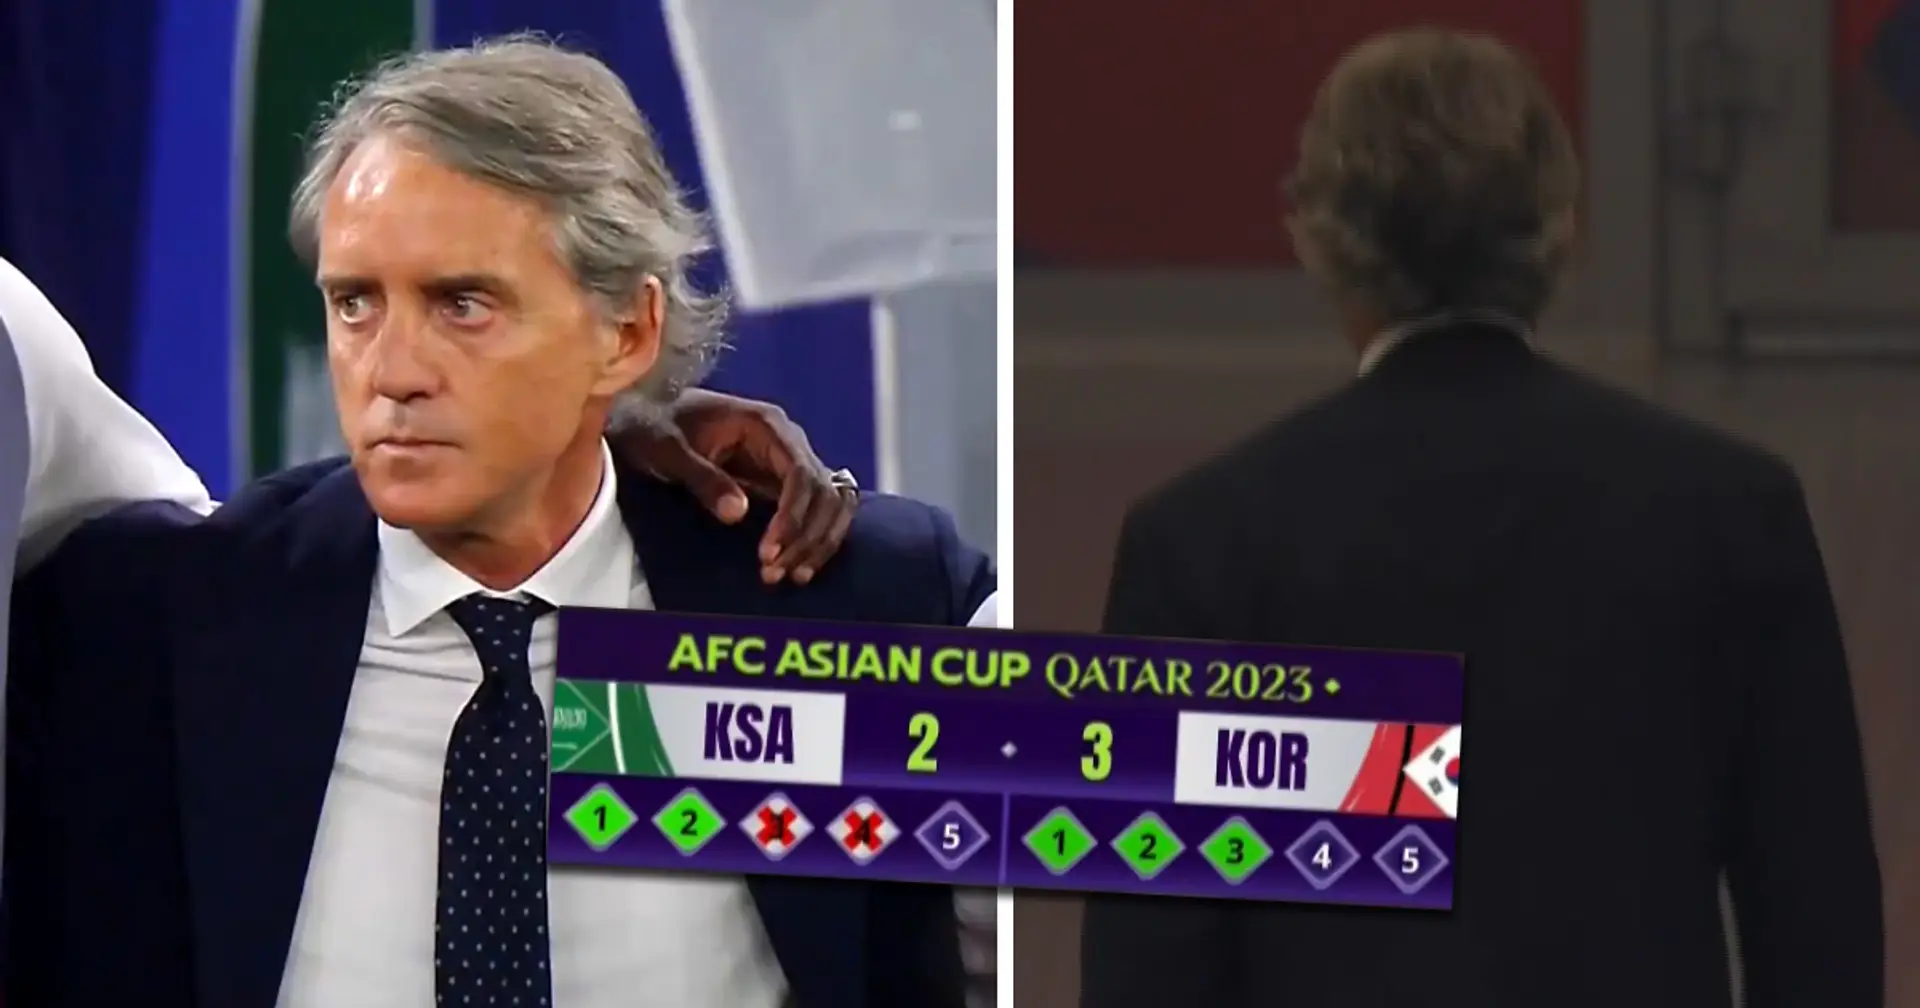 Roberto Mancini walks down the tunnel before the end of Saudi Arabia's penalty shootout